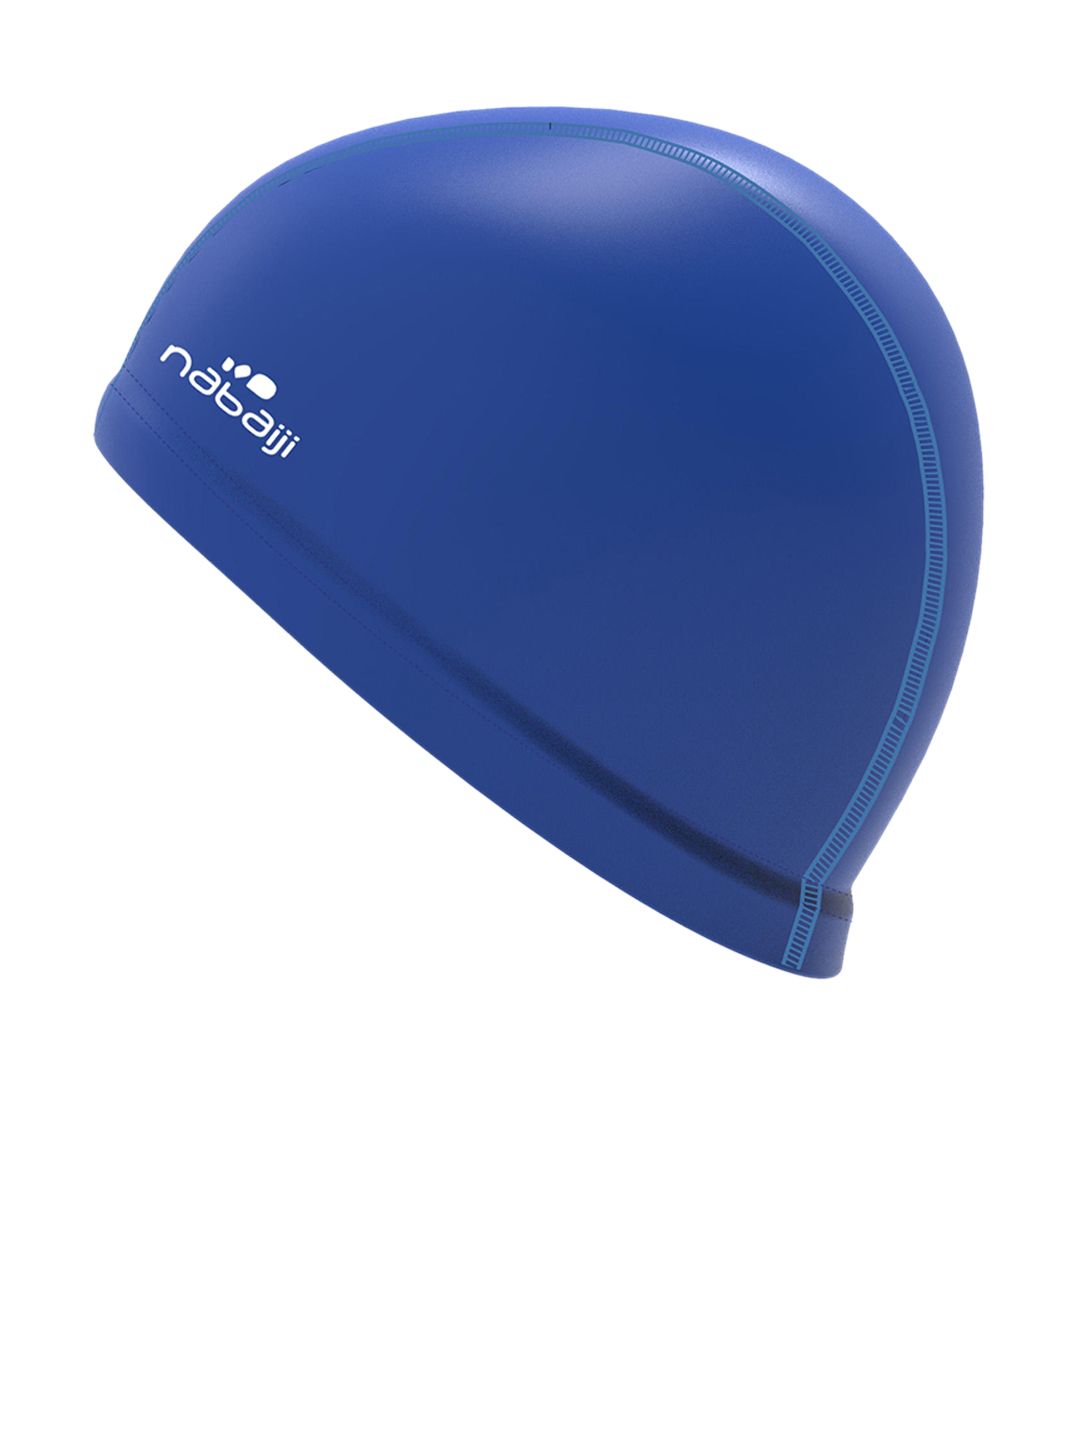 Nabaiji By Decathlon Blue Solid Silicon Mesh Swim Cap Price in India